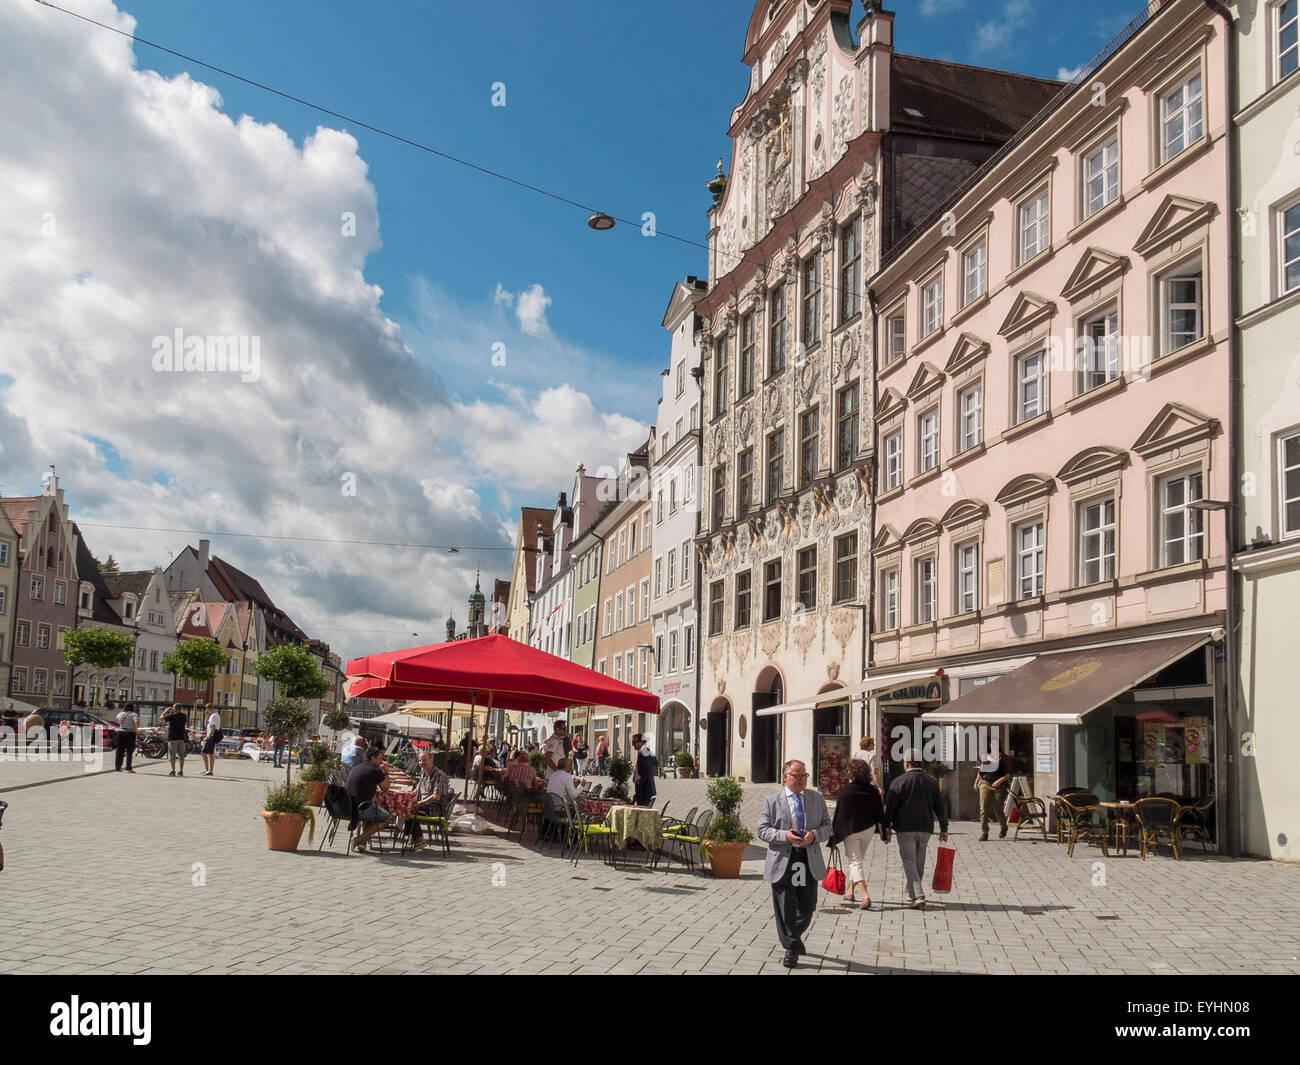 Landsberg am Lech - Main Square with town hall, Bavaria, Germany Stock Photo